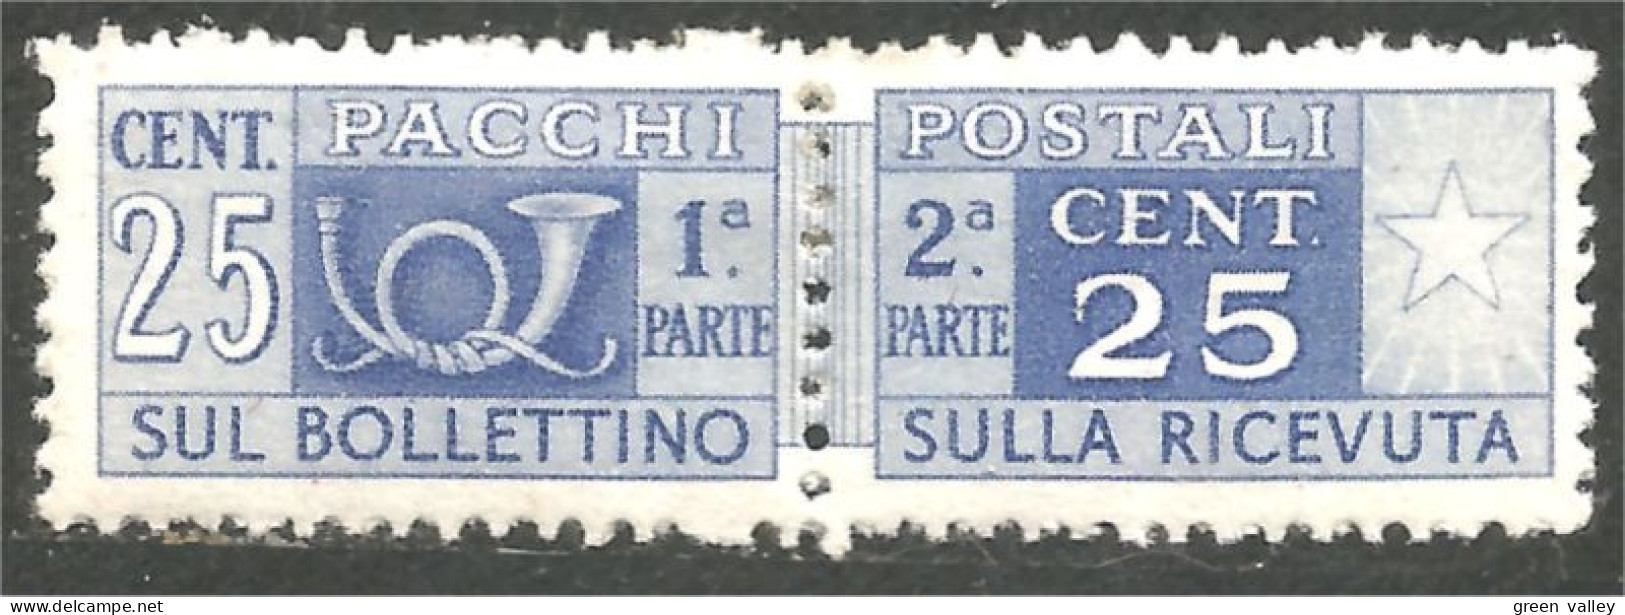 XW01-0168 Italy Paquet Parcel 25 Cent MH * Neuf - Unclassified